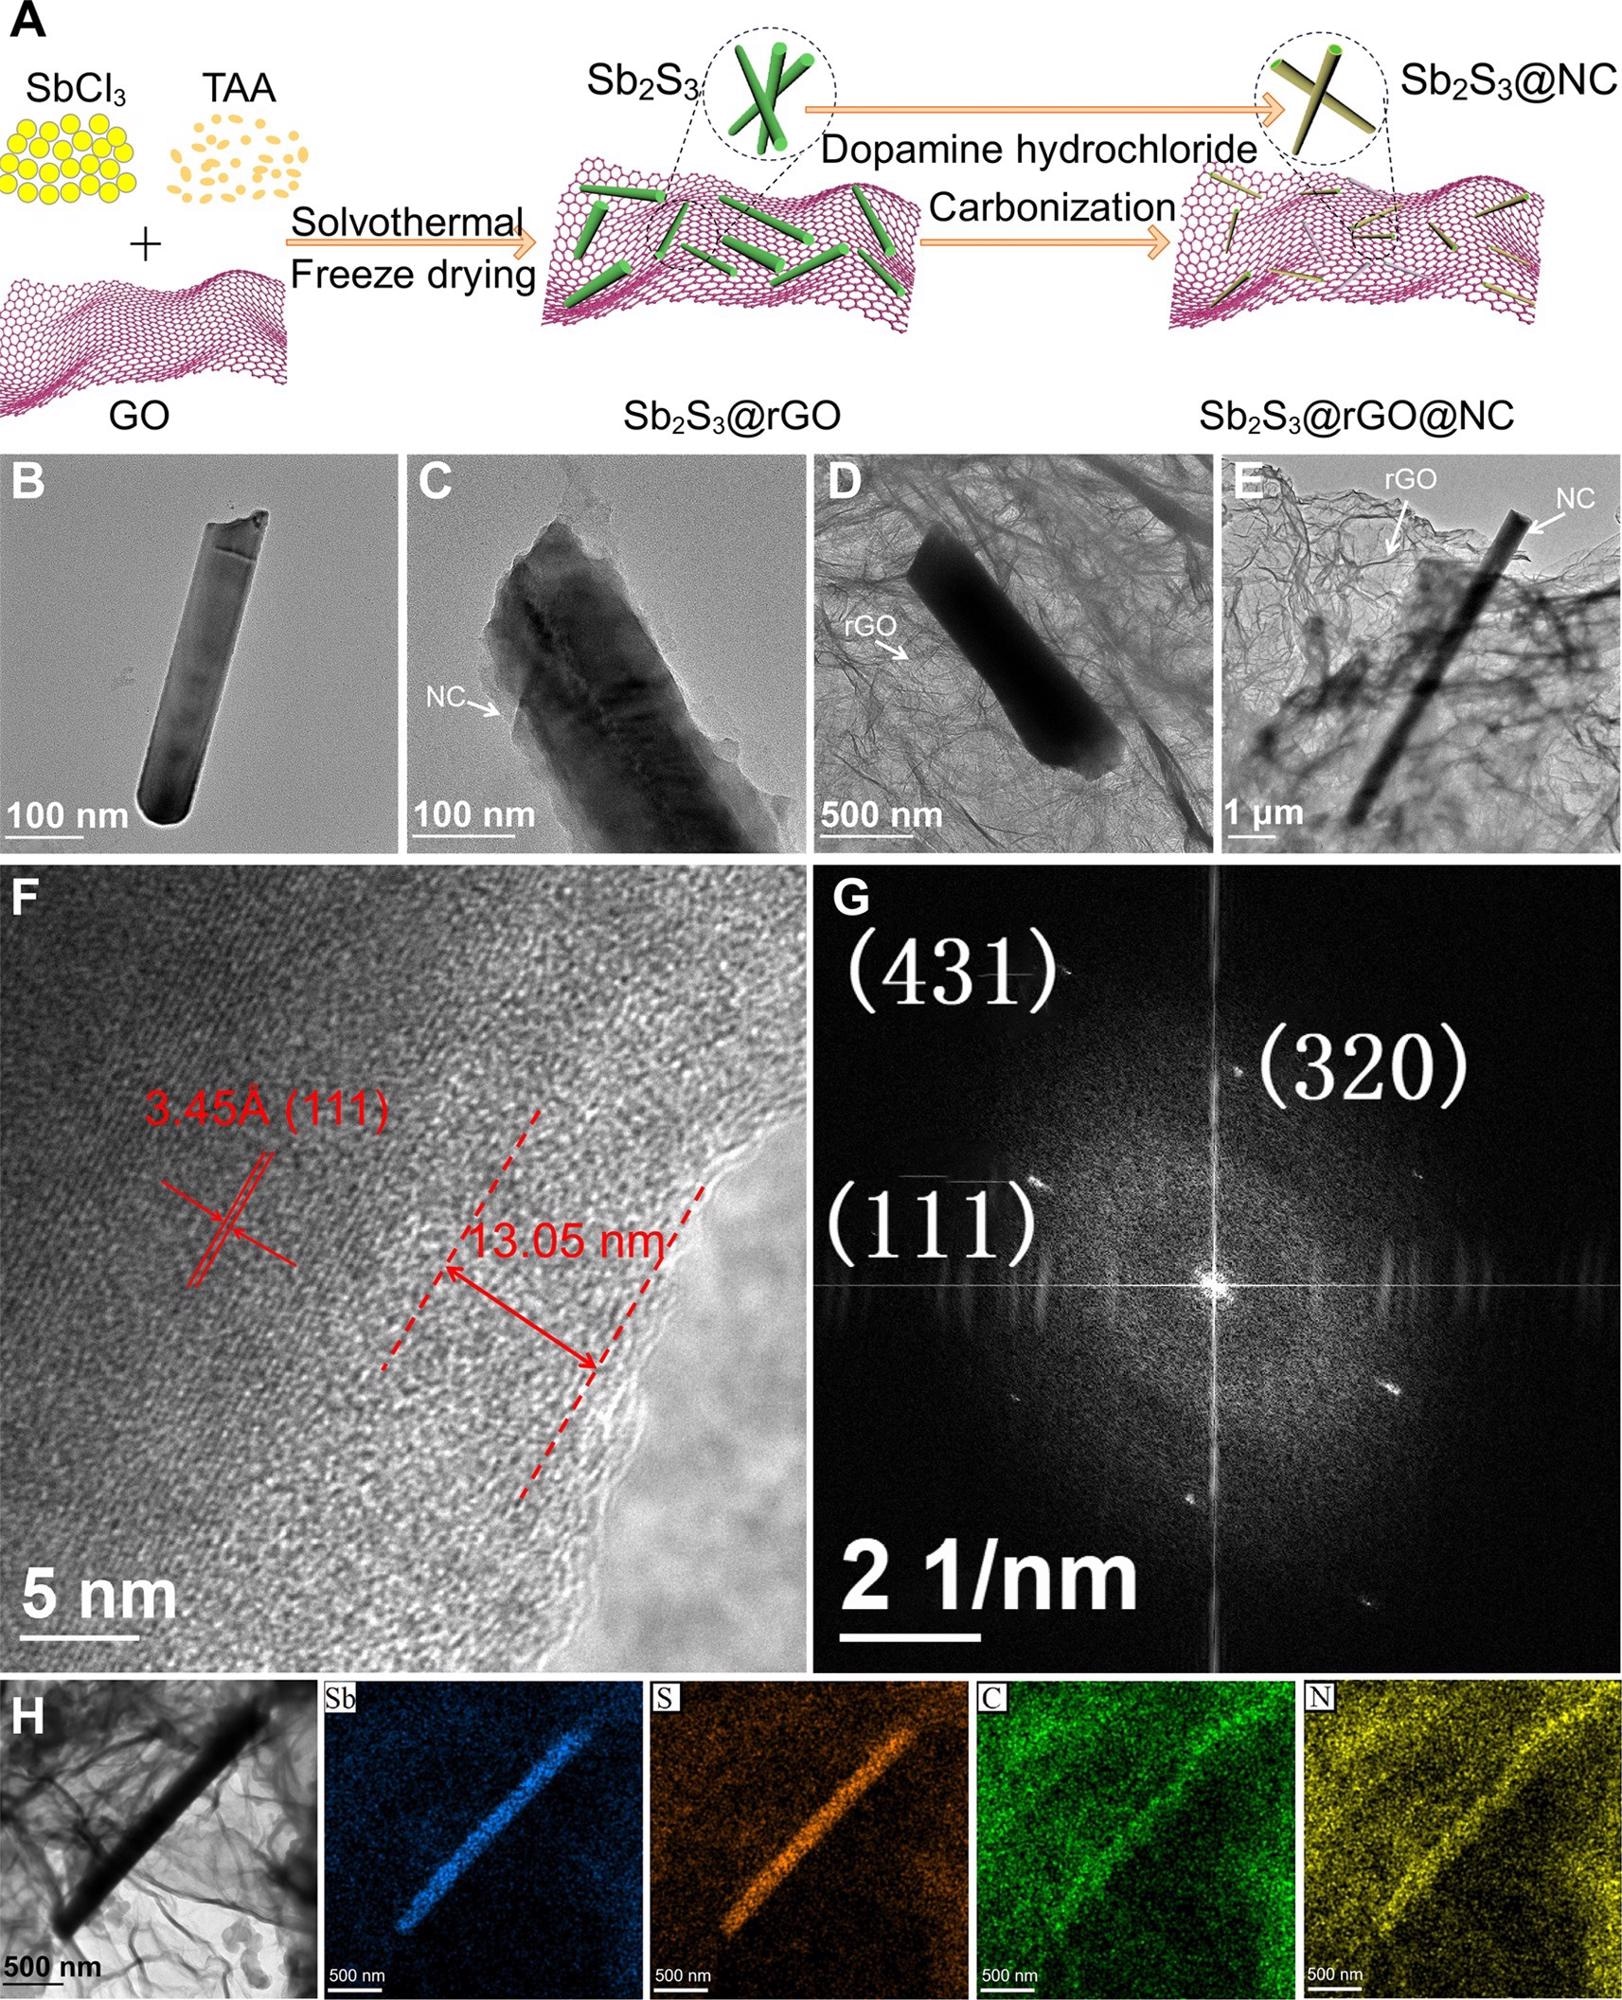 Morphology and microstructure characterization. (A) Schematic of preparation process; TEM images of (B) bare Sb2S3, (C) Sb2S3@NC, (D) Sb2S3@rGO and (E) Sb2S3@rGO@NC; (F) HRTEM, (G) FFT pattern and (H) EDS mapping images of Sb2S3@rGO@NC.